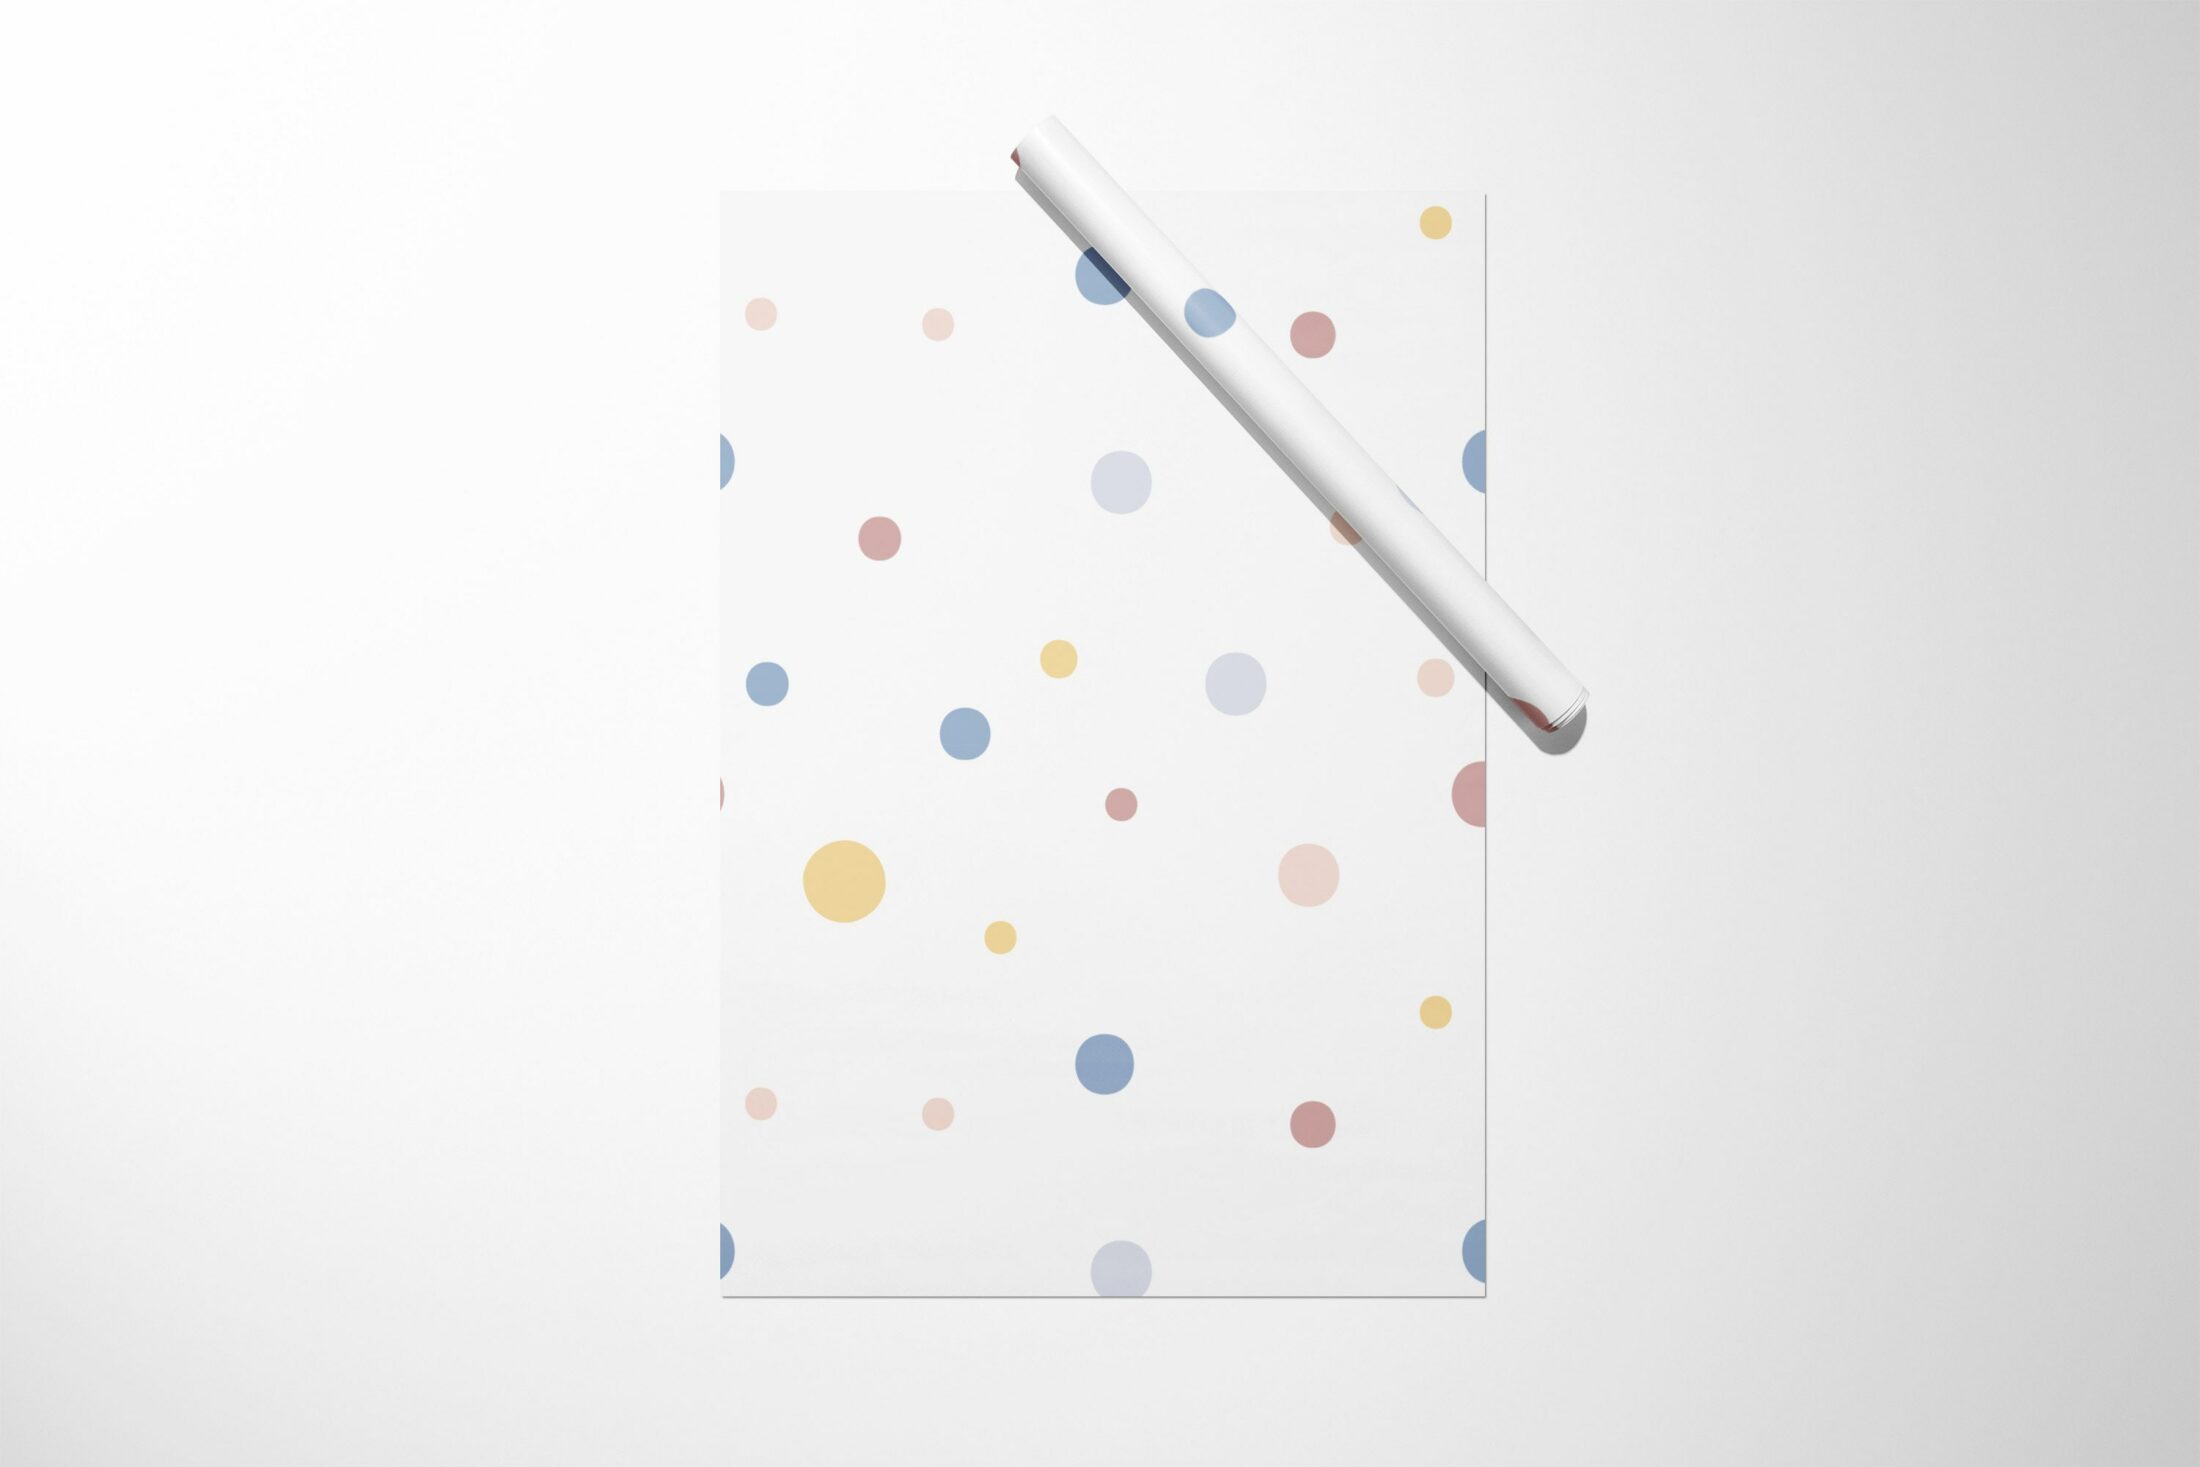 A Multi Color Polka Dot Wrapping Paper || Christmas Wrapping Paper Birthday Bridal Baby Shower Wedding Gift Unique For Her Him Girl 03-016-718 with polka dots on it.